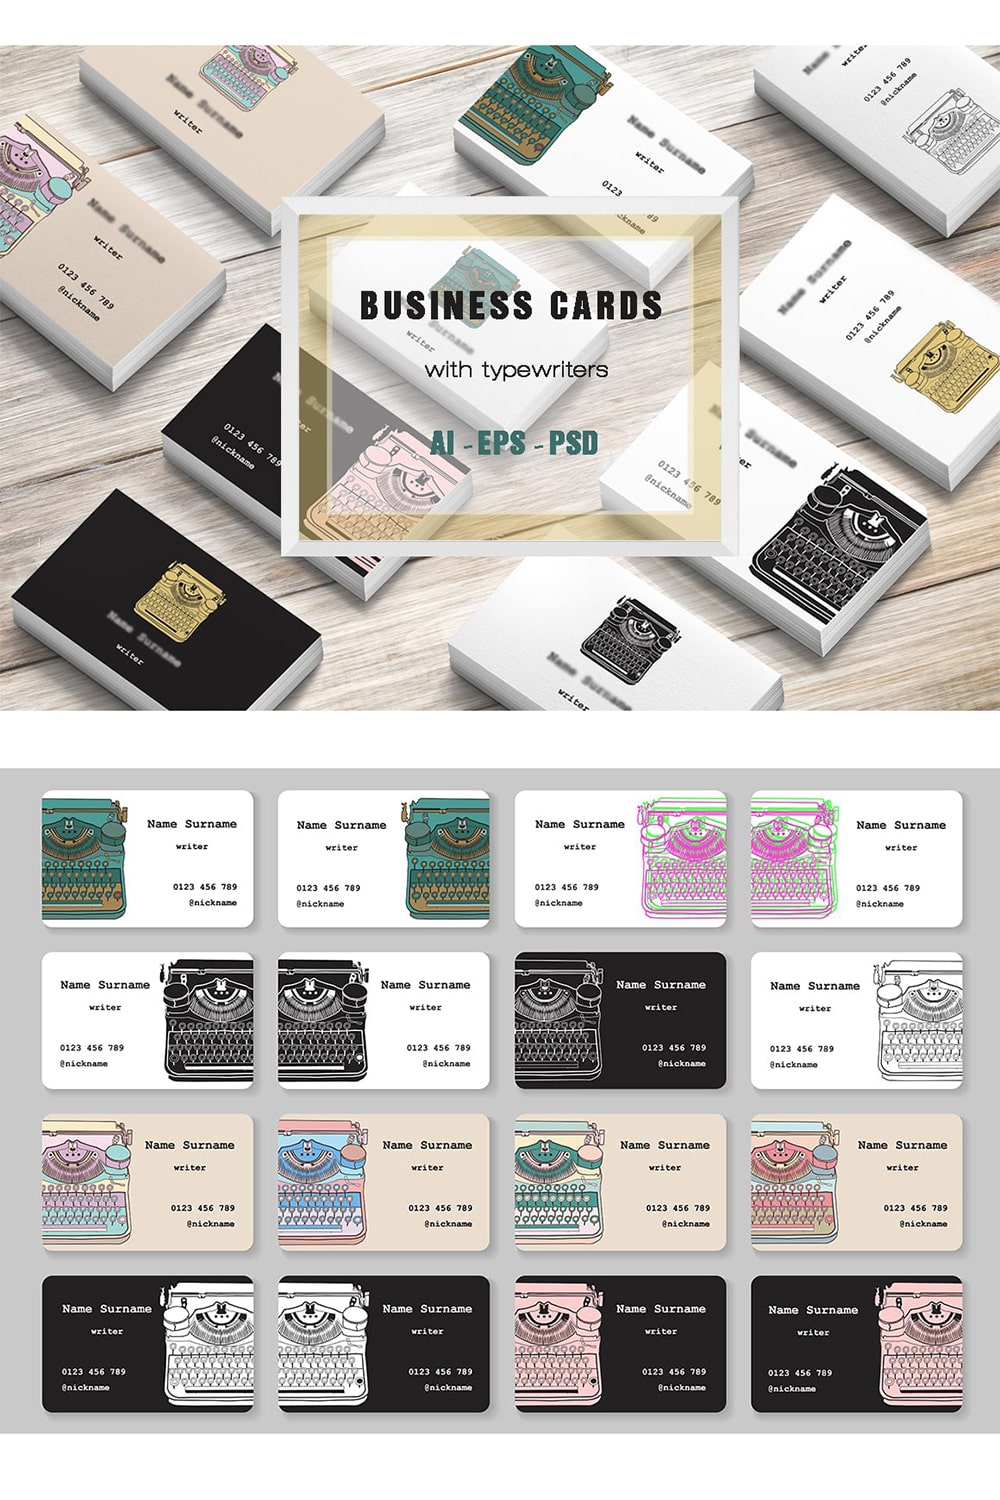 Business Cards with Typewriters pinterest.